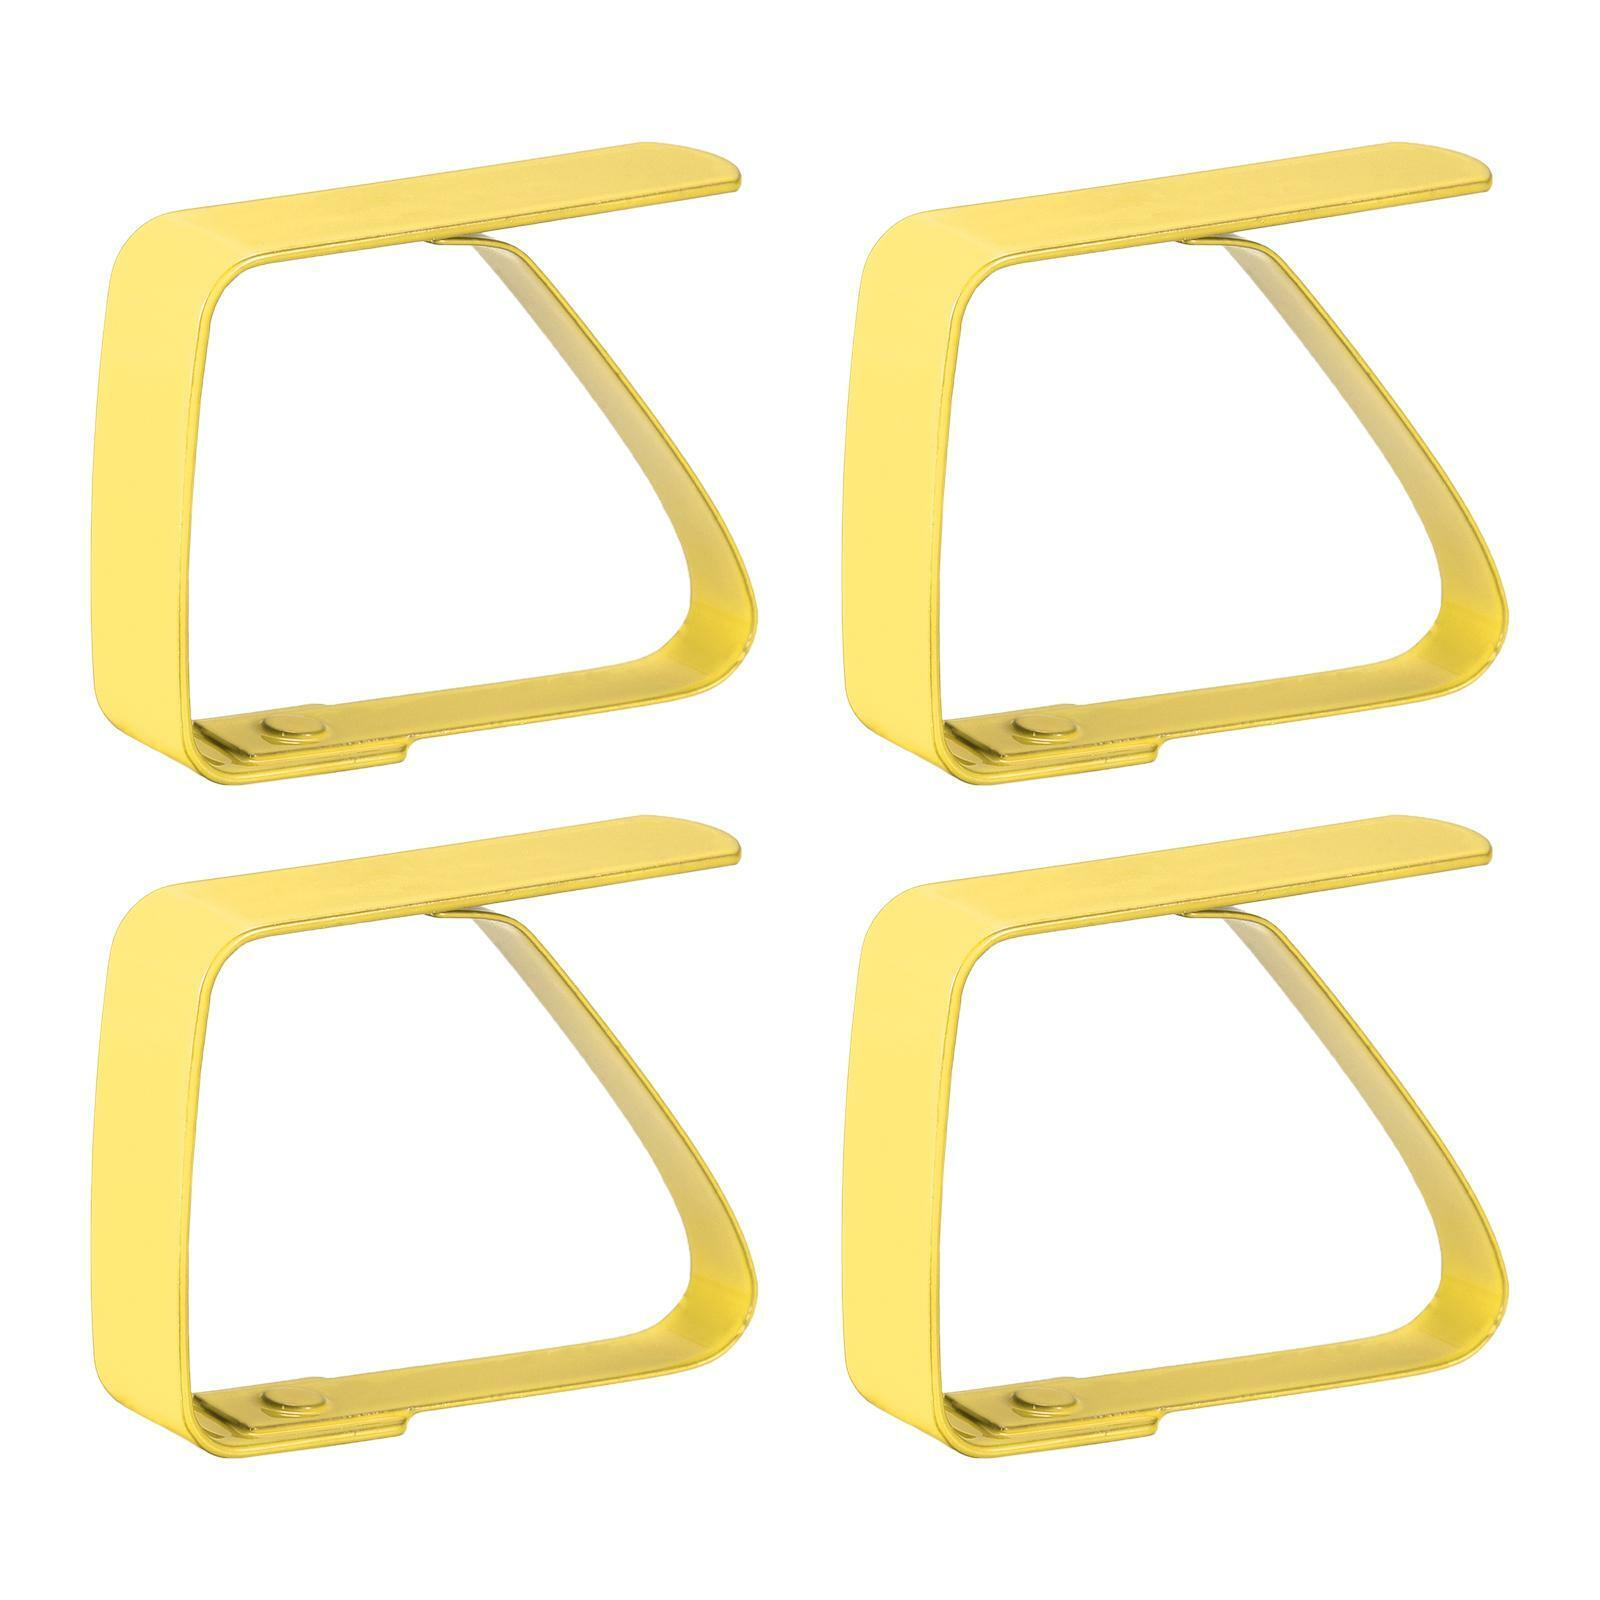 Tablecloth Clips 50mm X 40mm 420 Stainless Steel Table Cloth Holder Yellow 12pcs